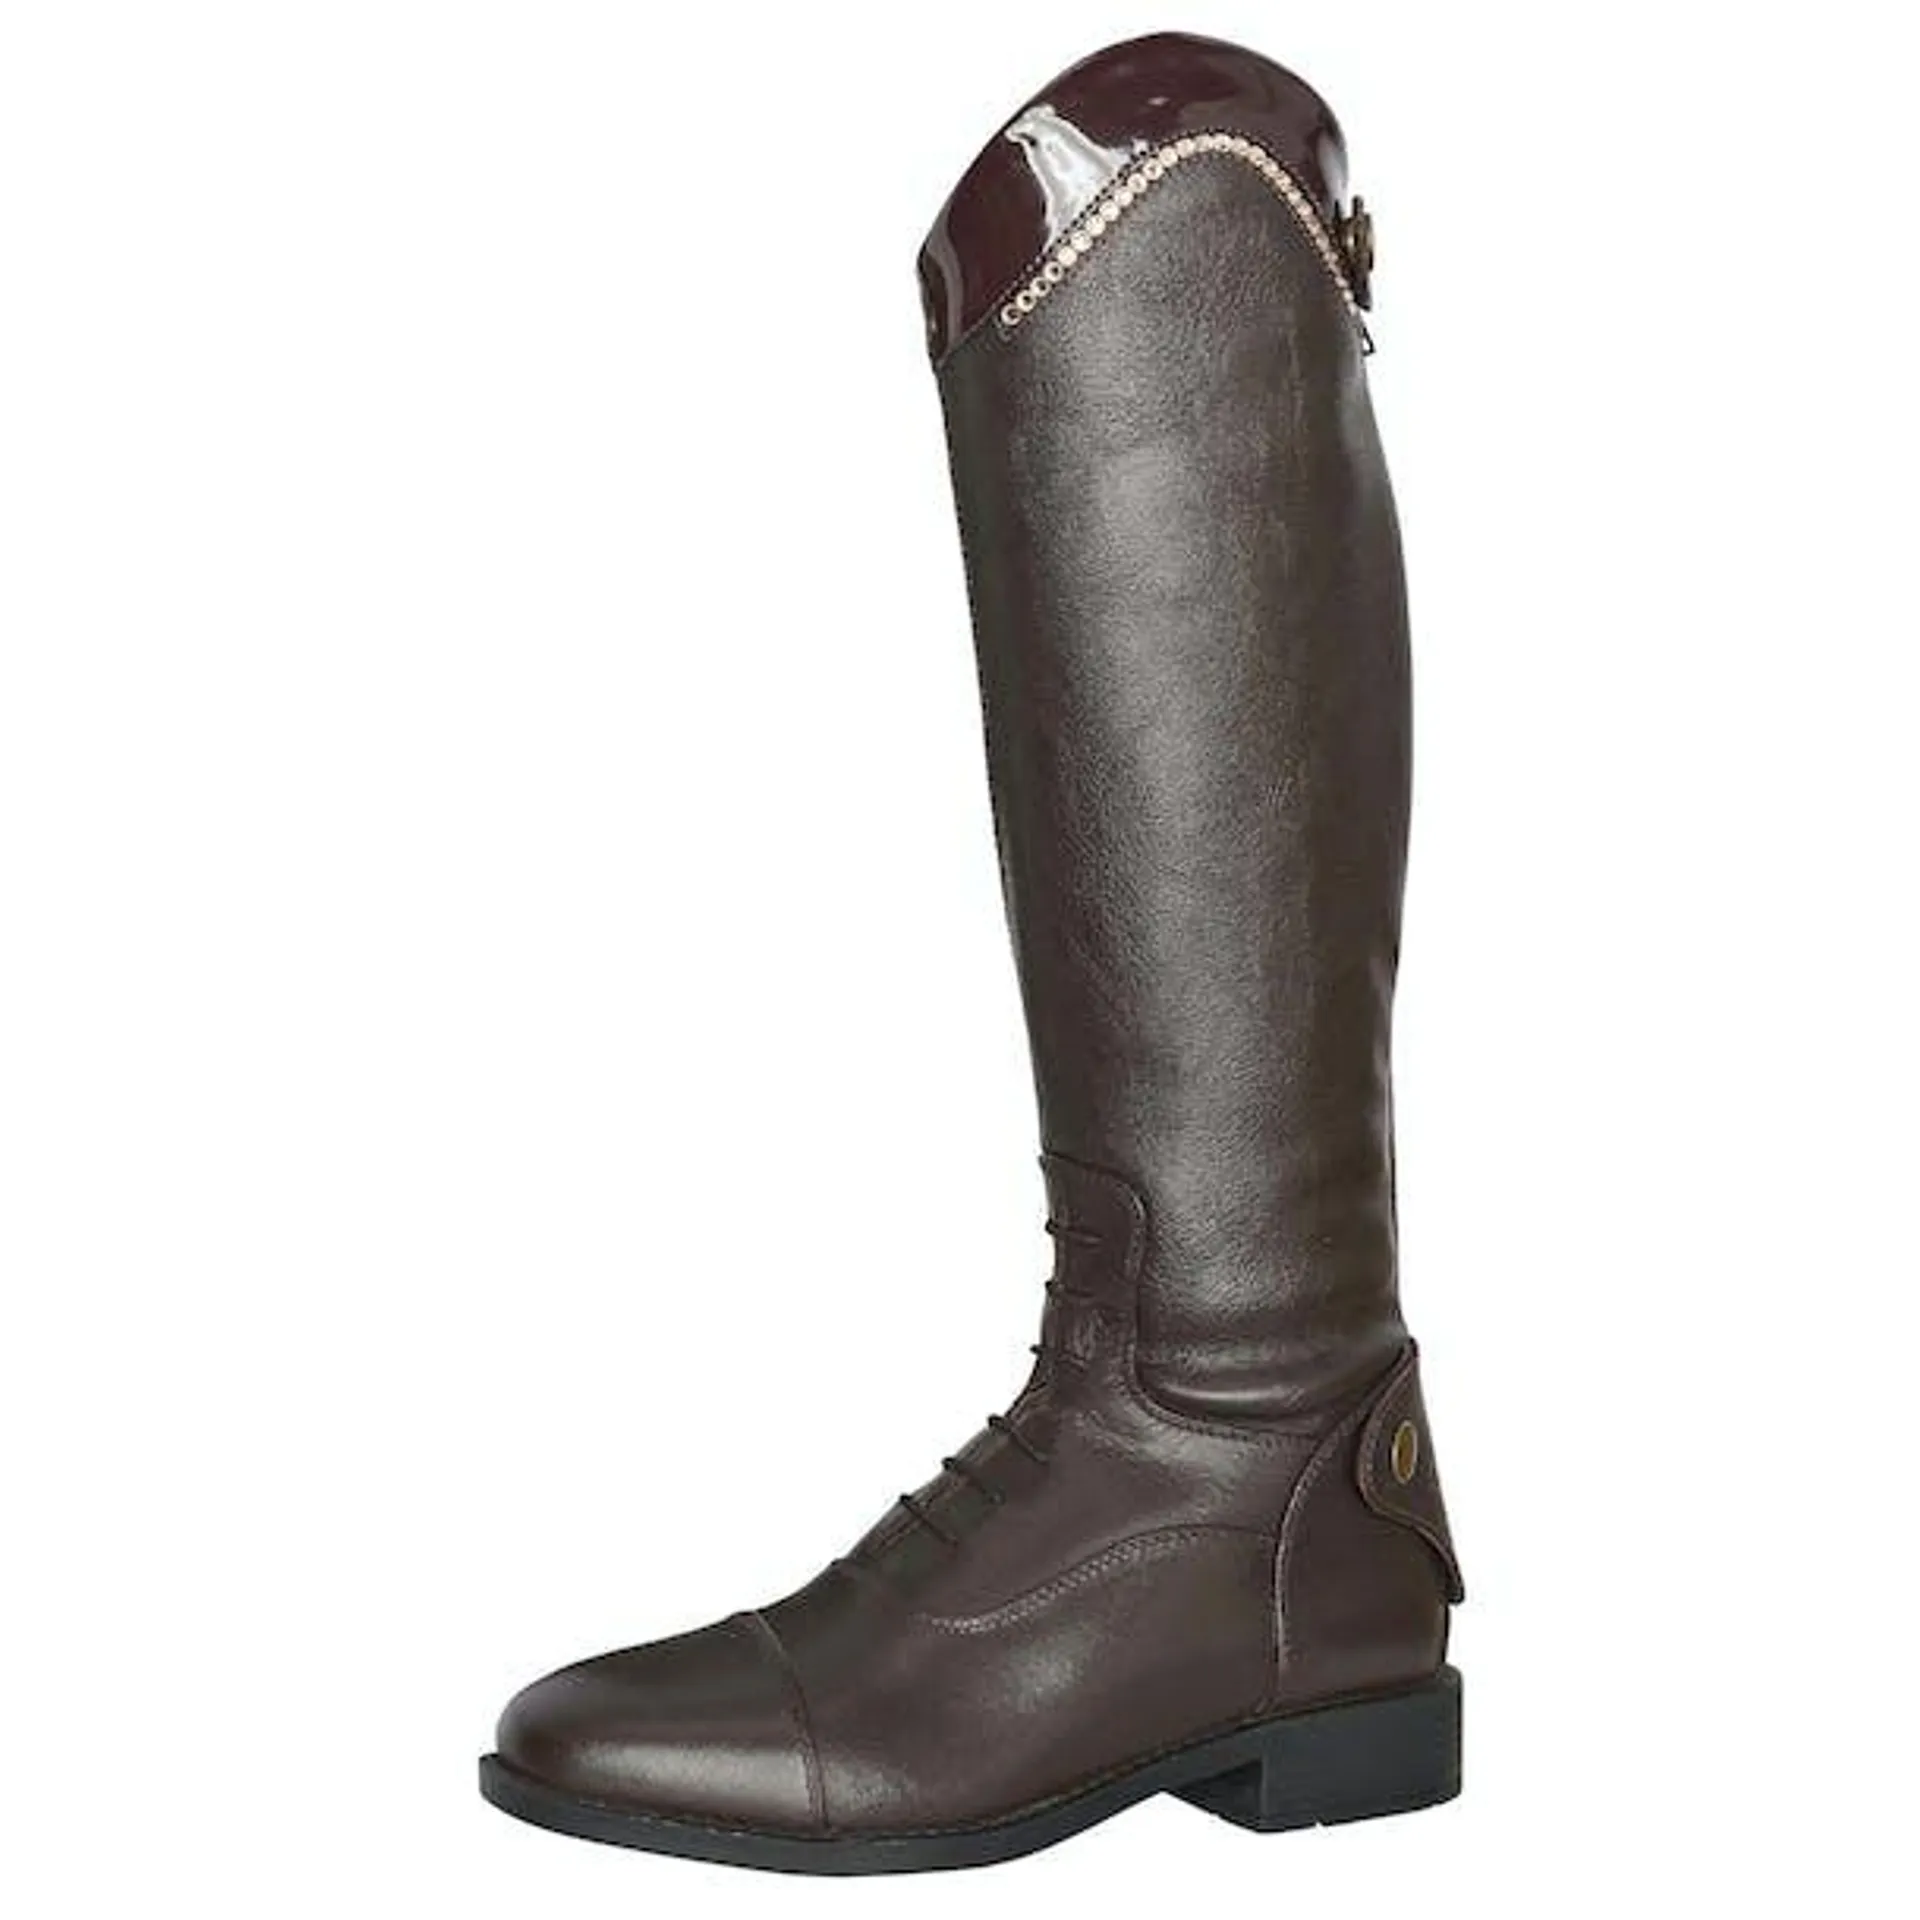 Imperial Riding Walker Glam Childrens Long Riding Boots